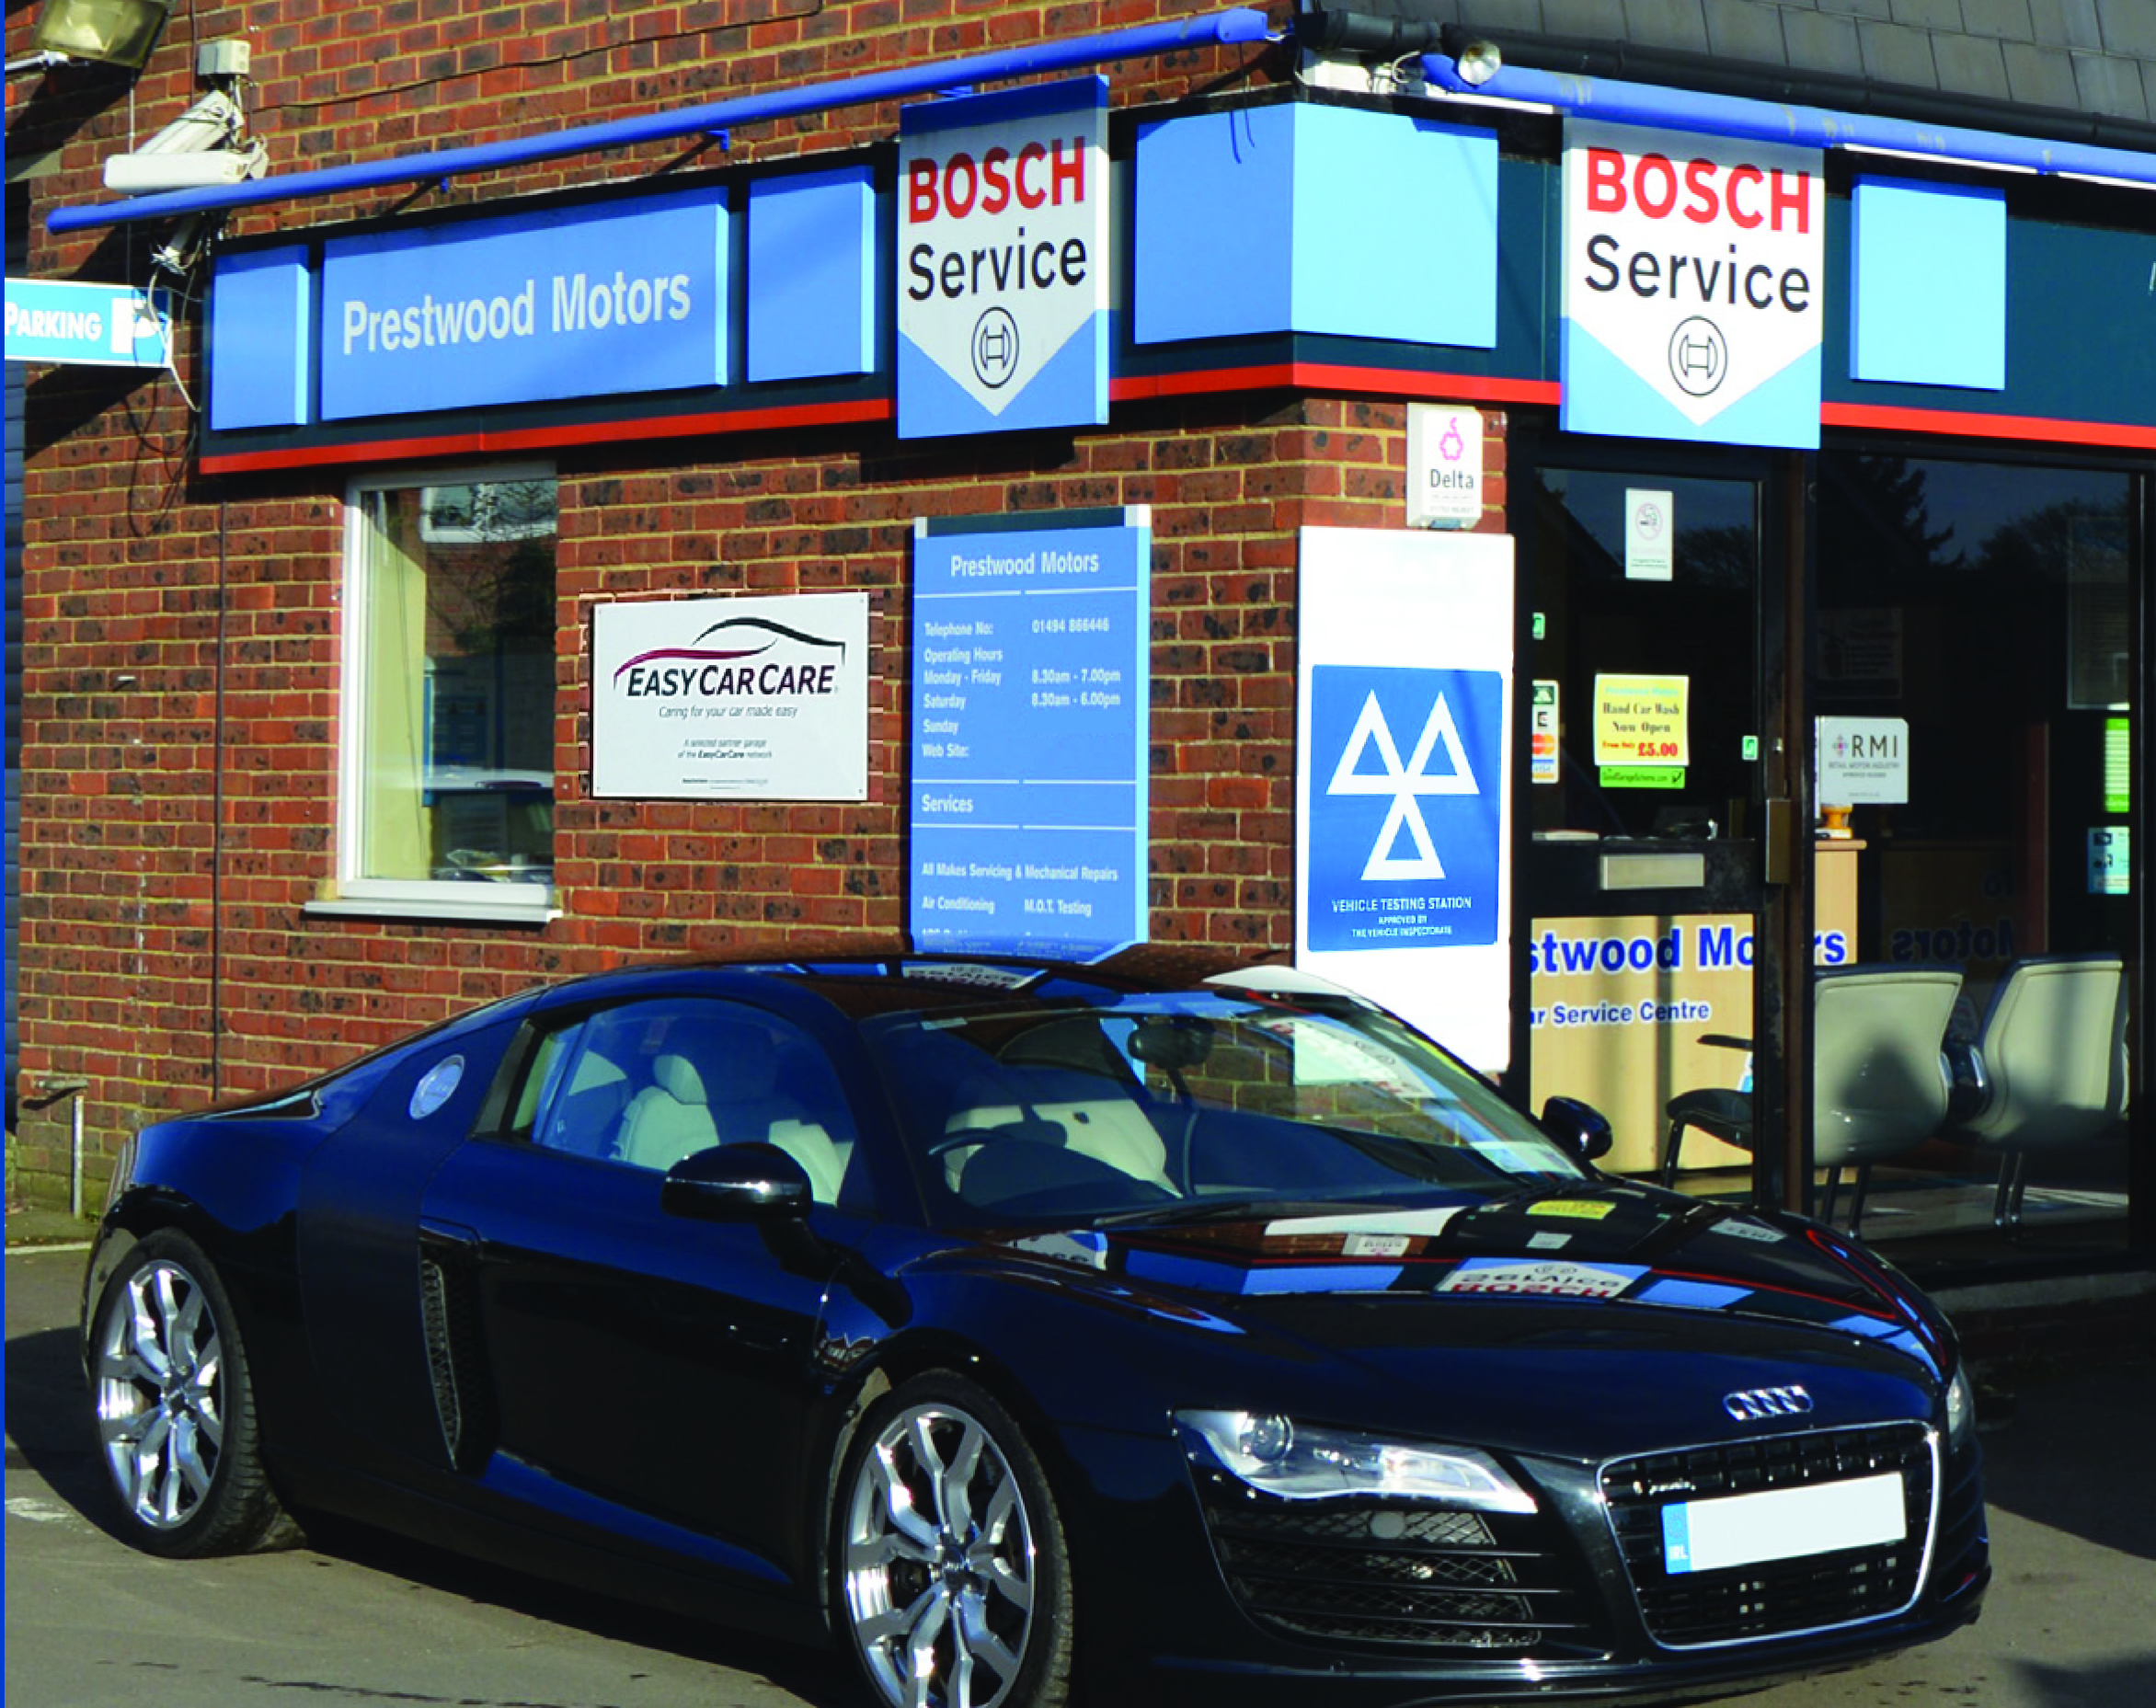 Prestwood Motors in Great Missenden is proud to be a selected Partner Garage of the EasyCarCare Network